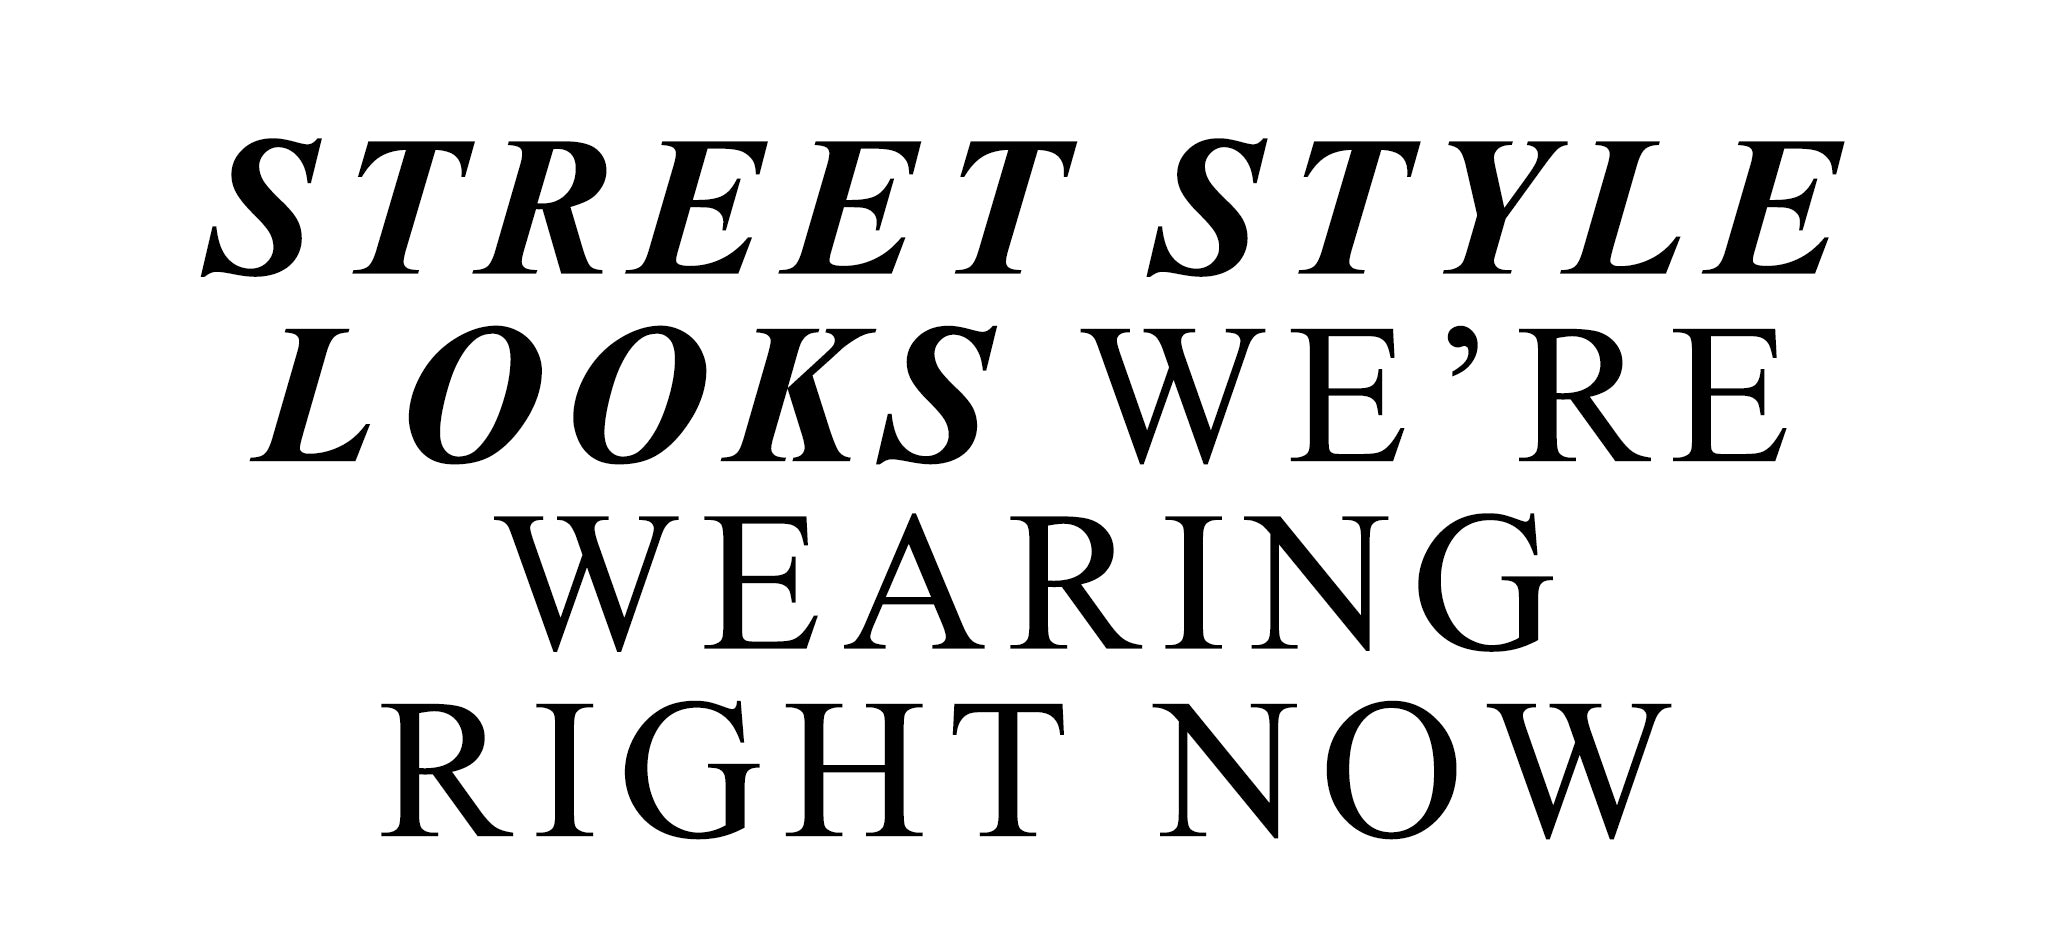 Street Style Looks We're Wearing Right Now